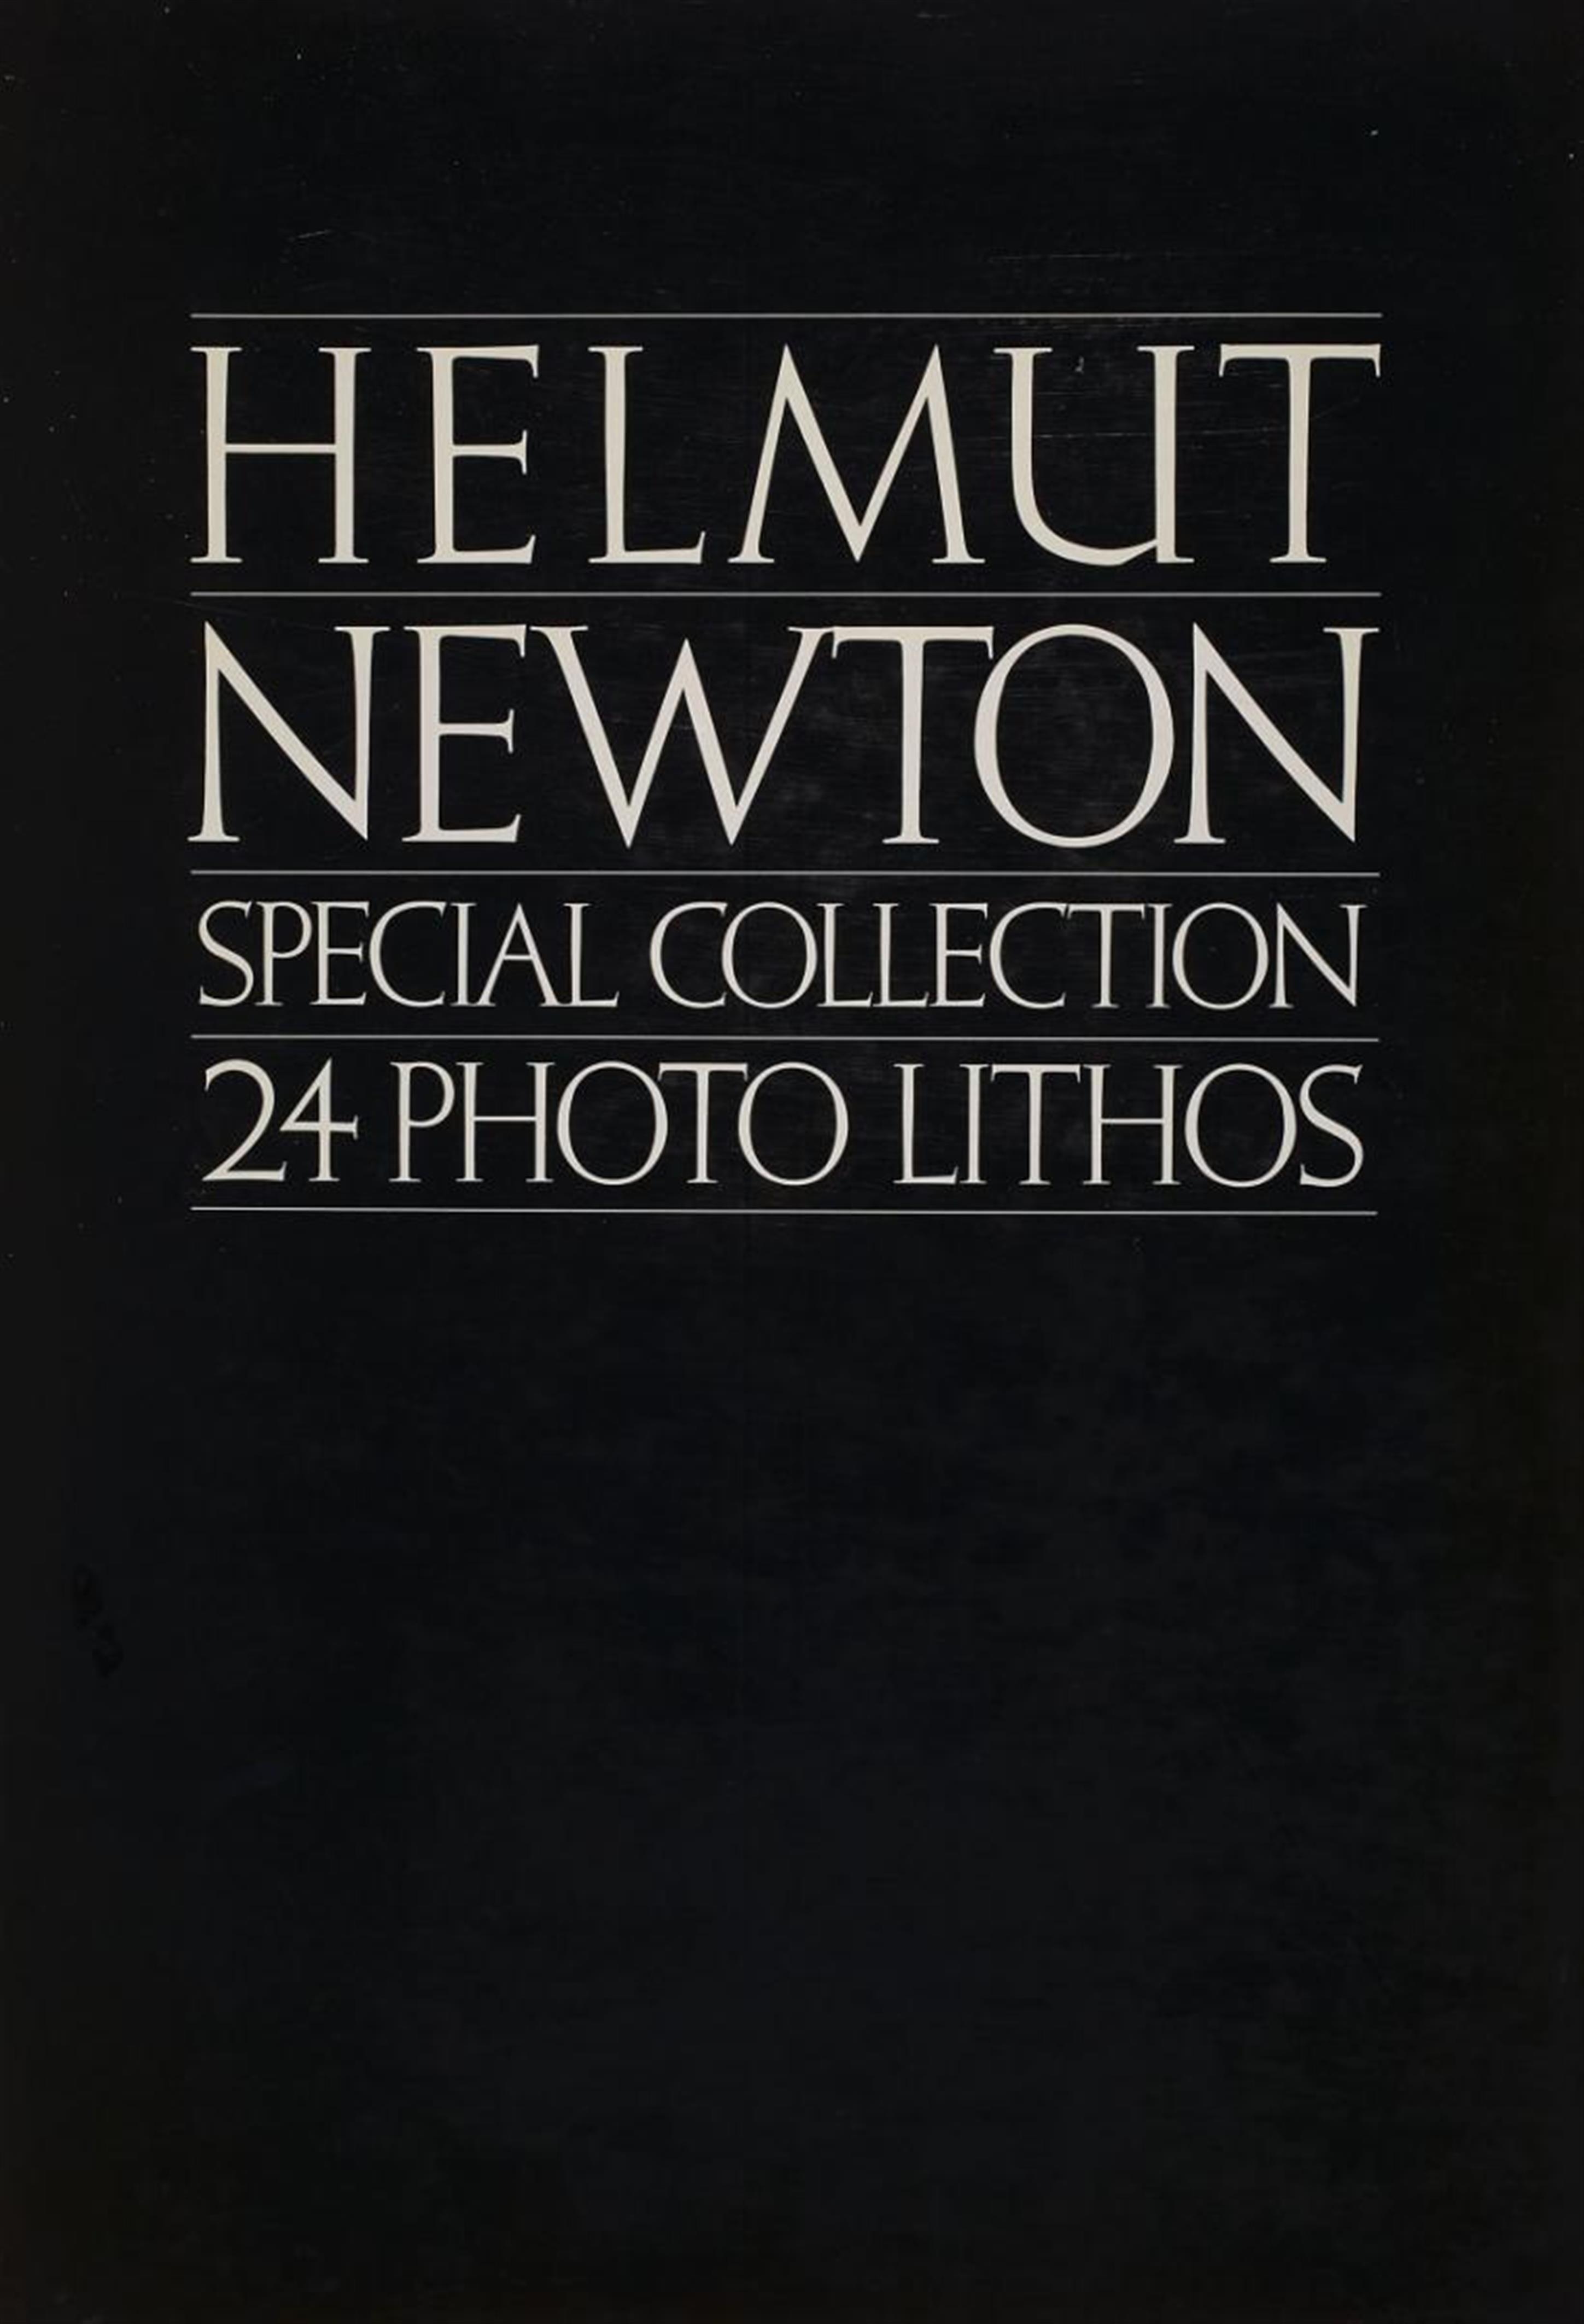 Helmut Newton - Special Collection. 24 Photo Lithos - image-1